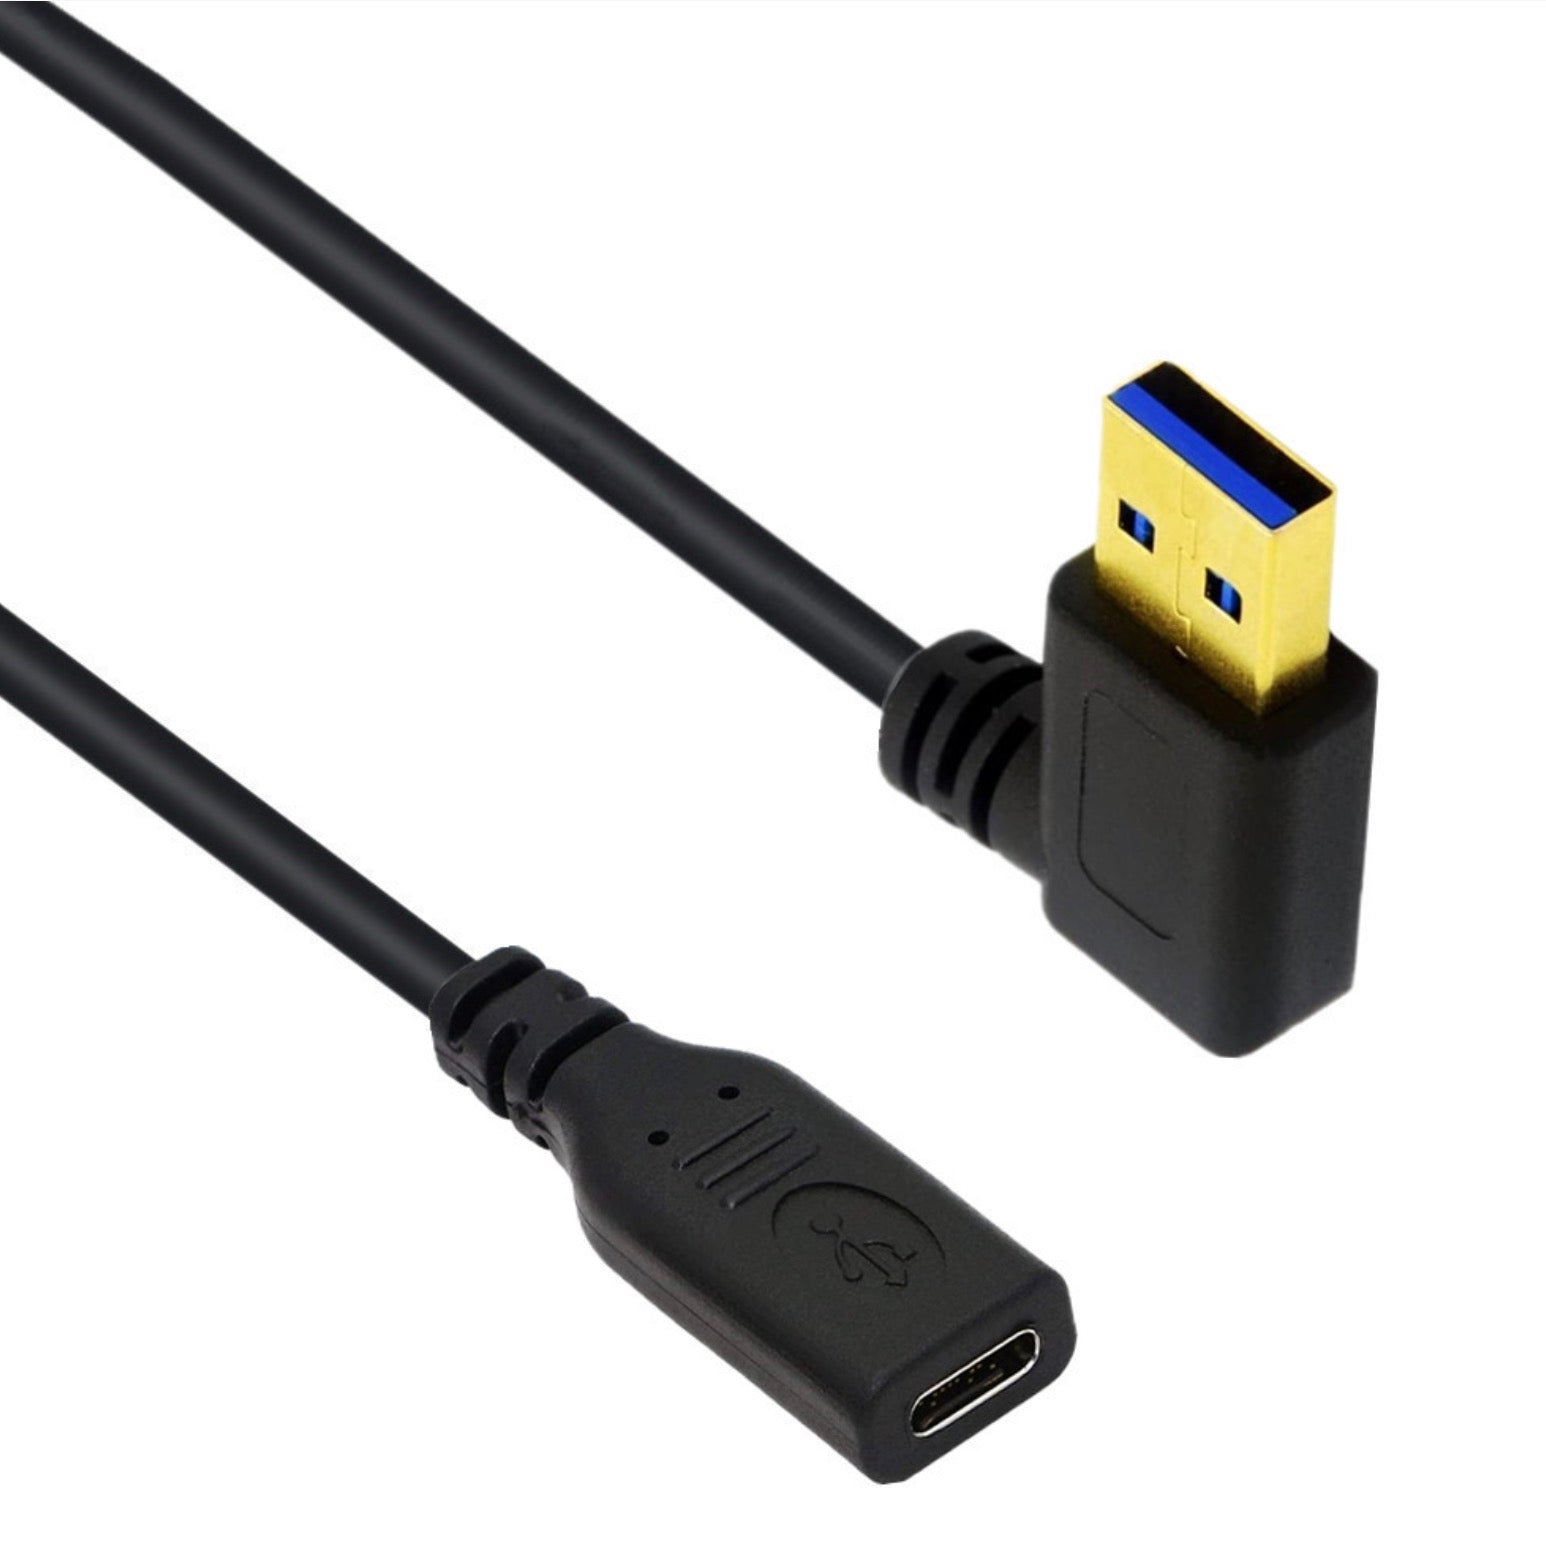 USB 3.0 Type A Male Angled to USB C Female Converter Cable 5Gbps 0.2m